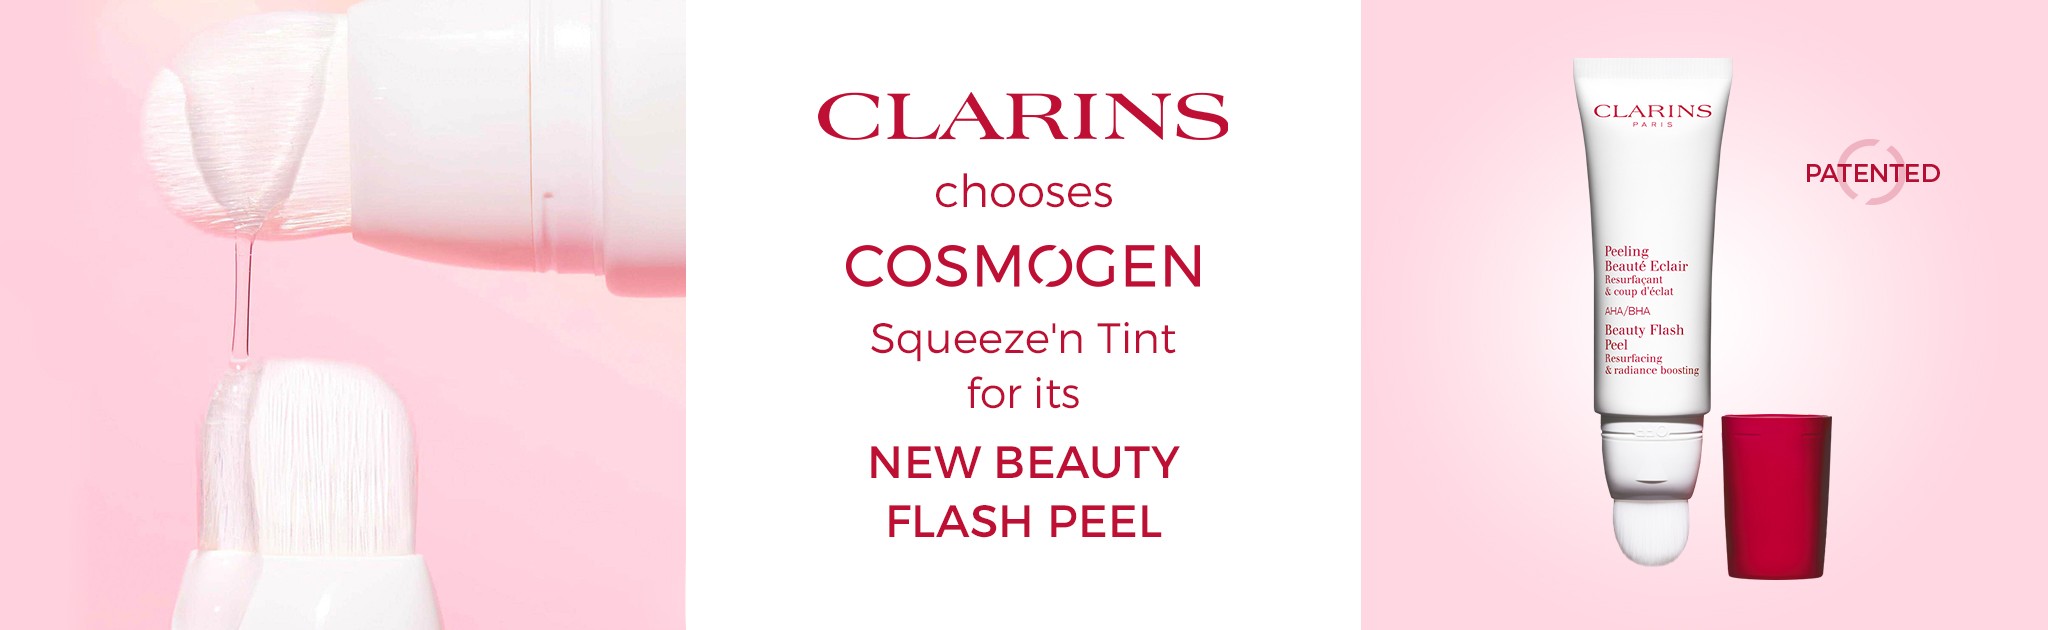 https://www.cosmogen.fr/d30-refillable-squeeze-n-tint.html?search_query=TINT&results=17